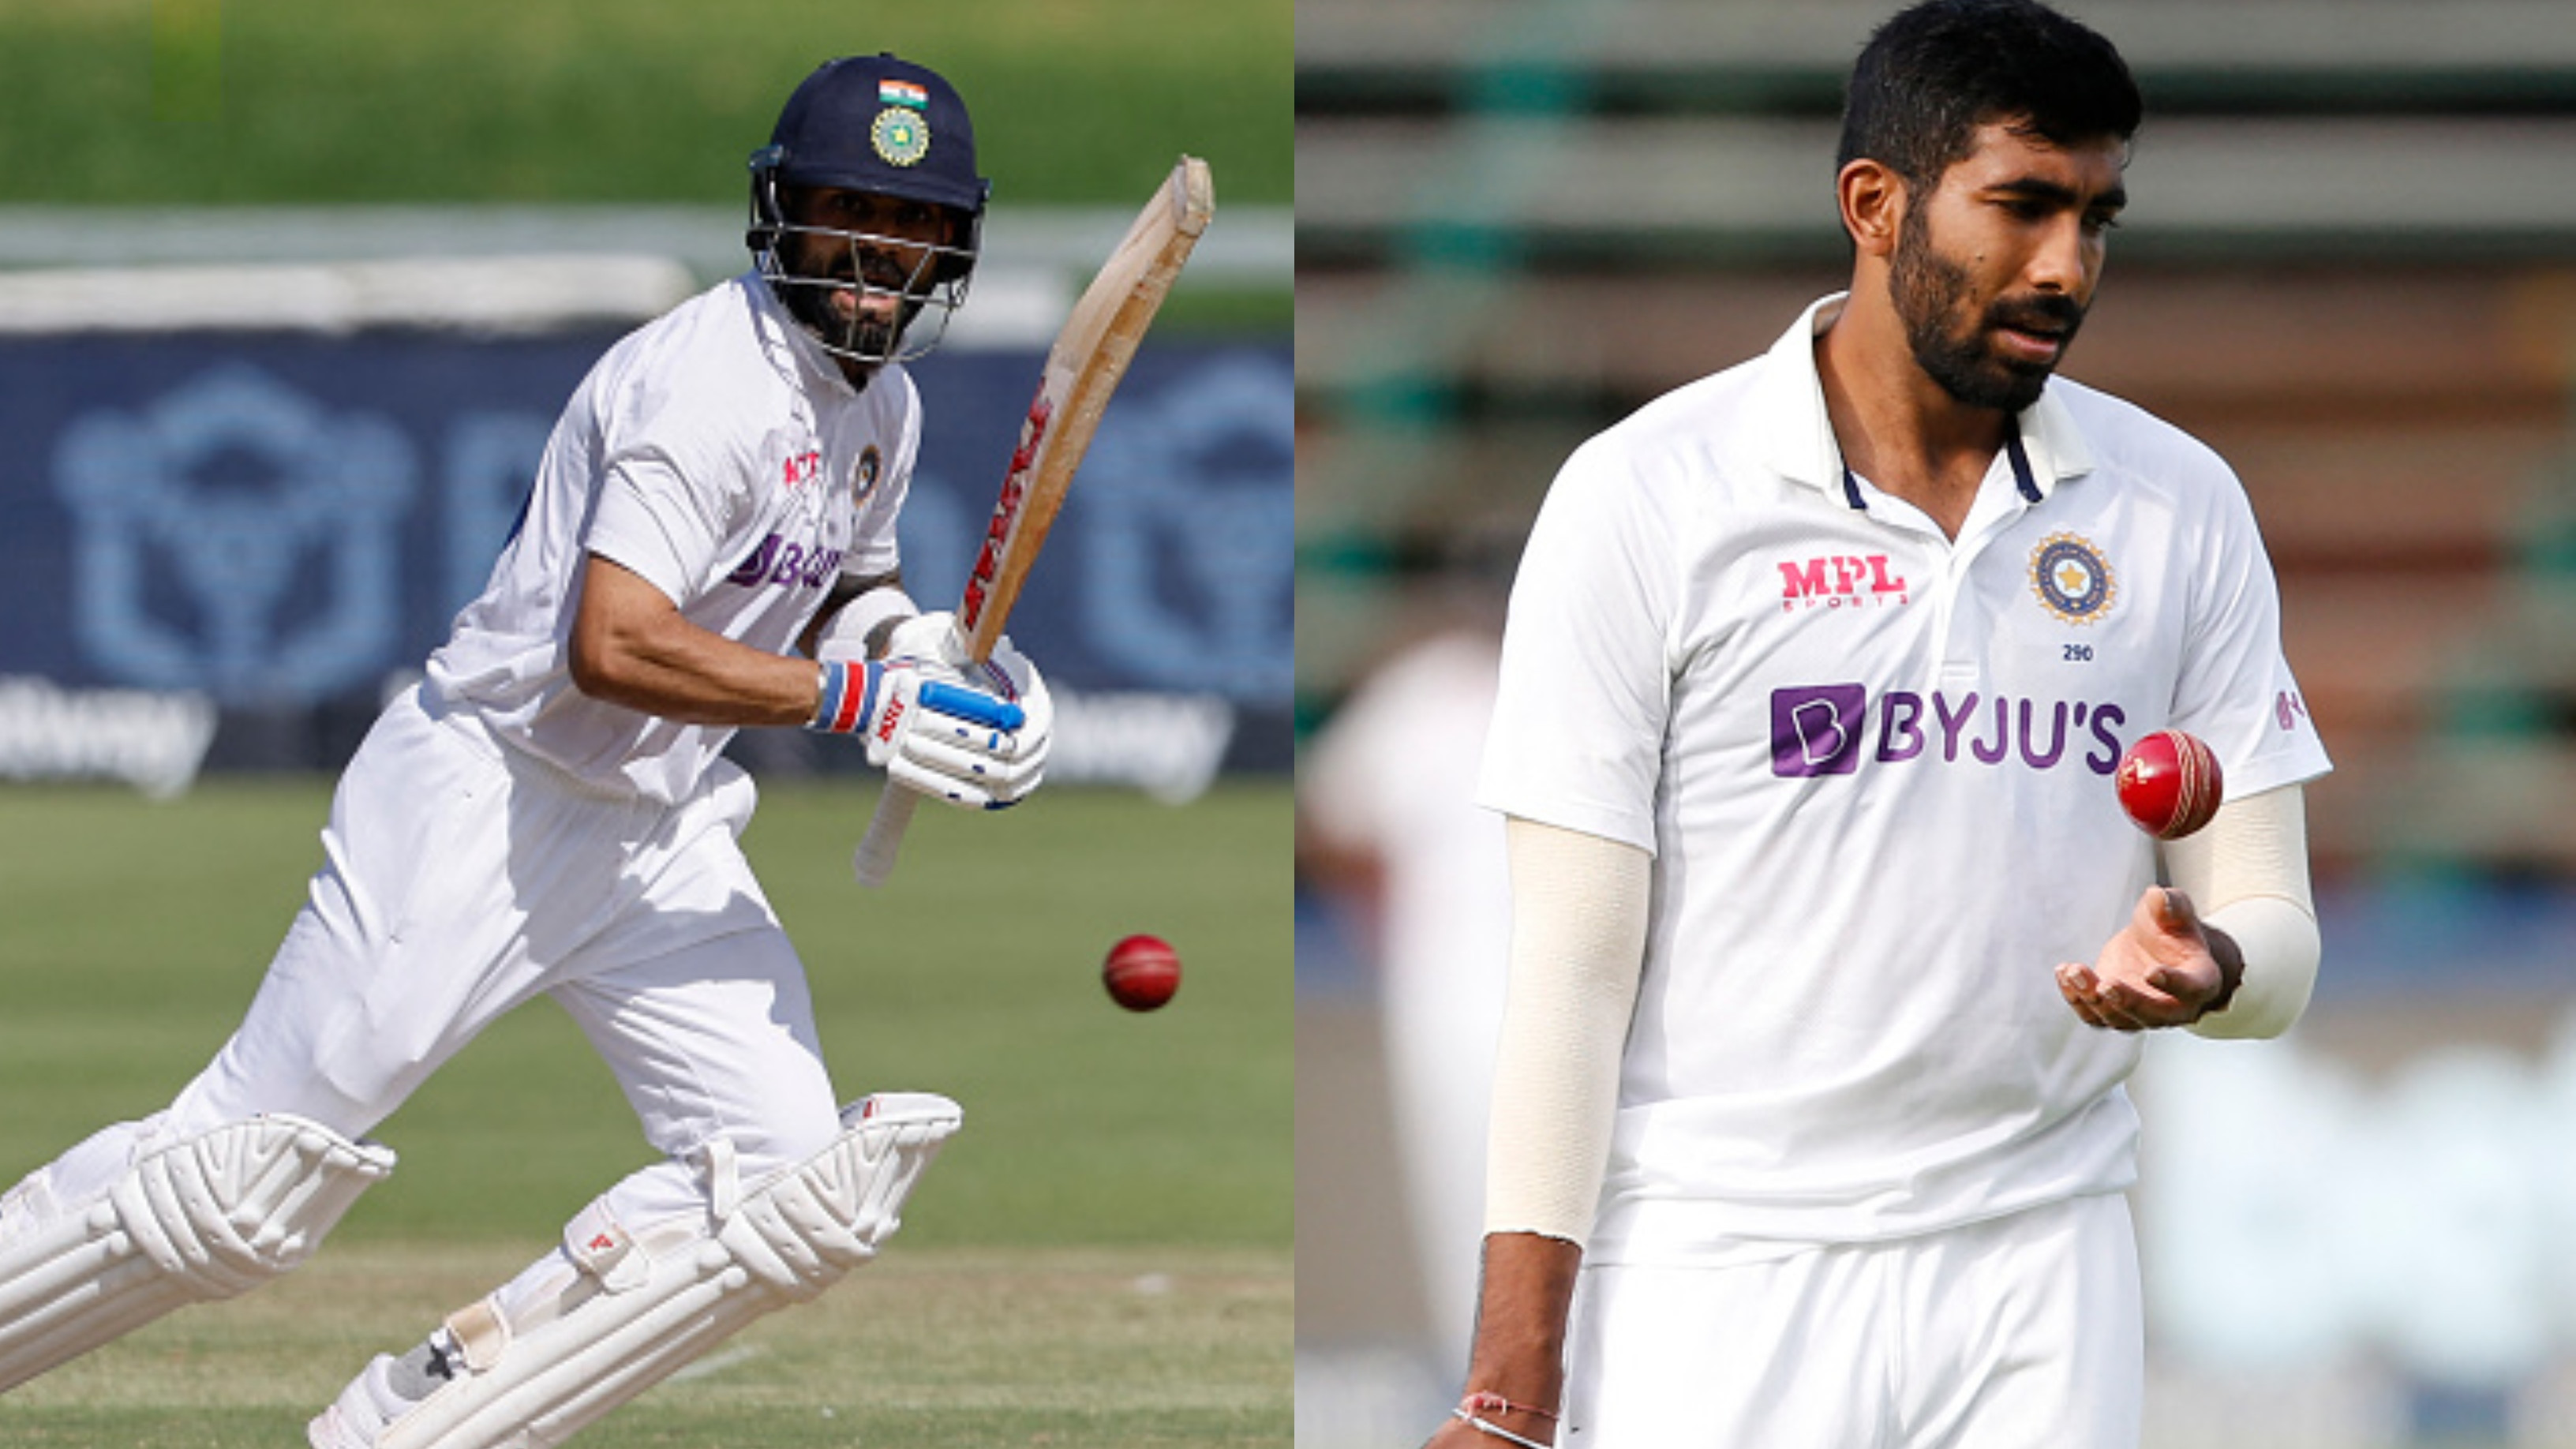 Virat Kohli slips to 9th spot among batters in ICC Test rankings; Bumrah climbs to 4th in bowling chart